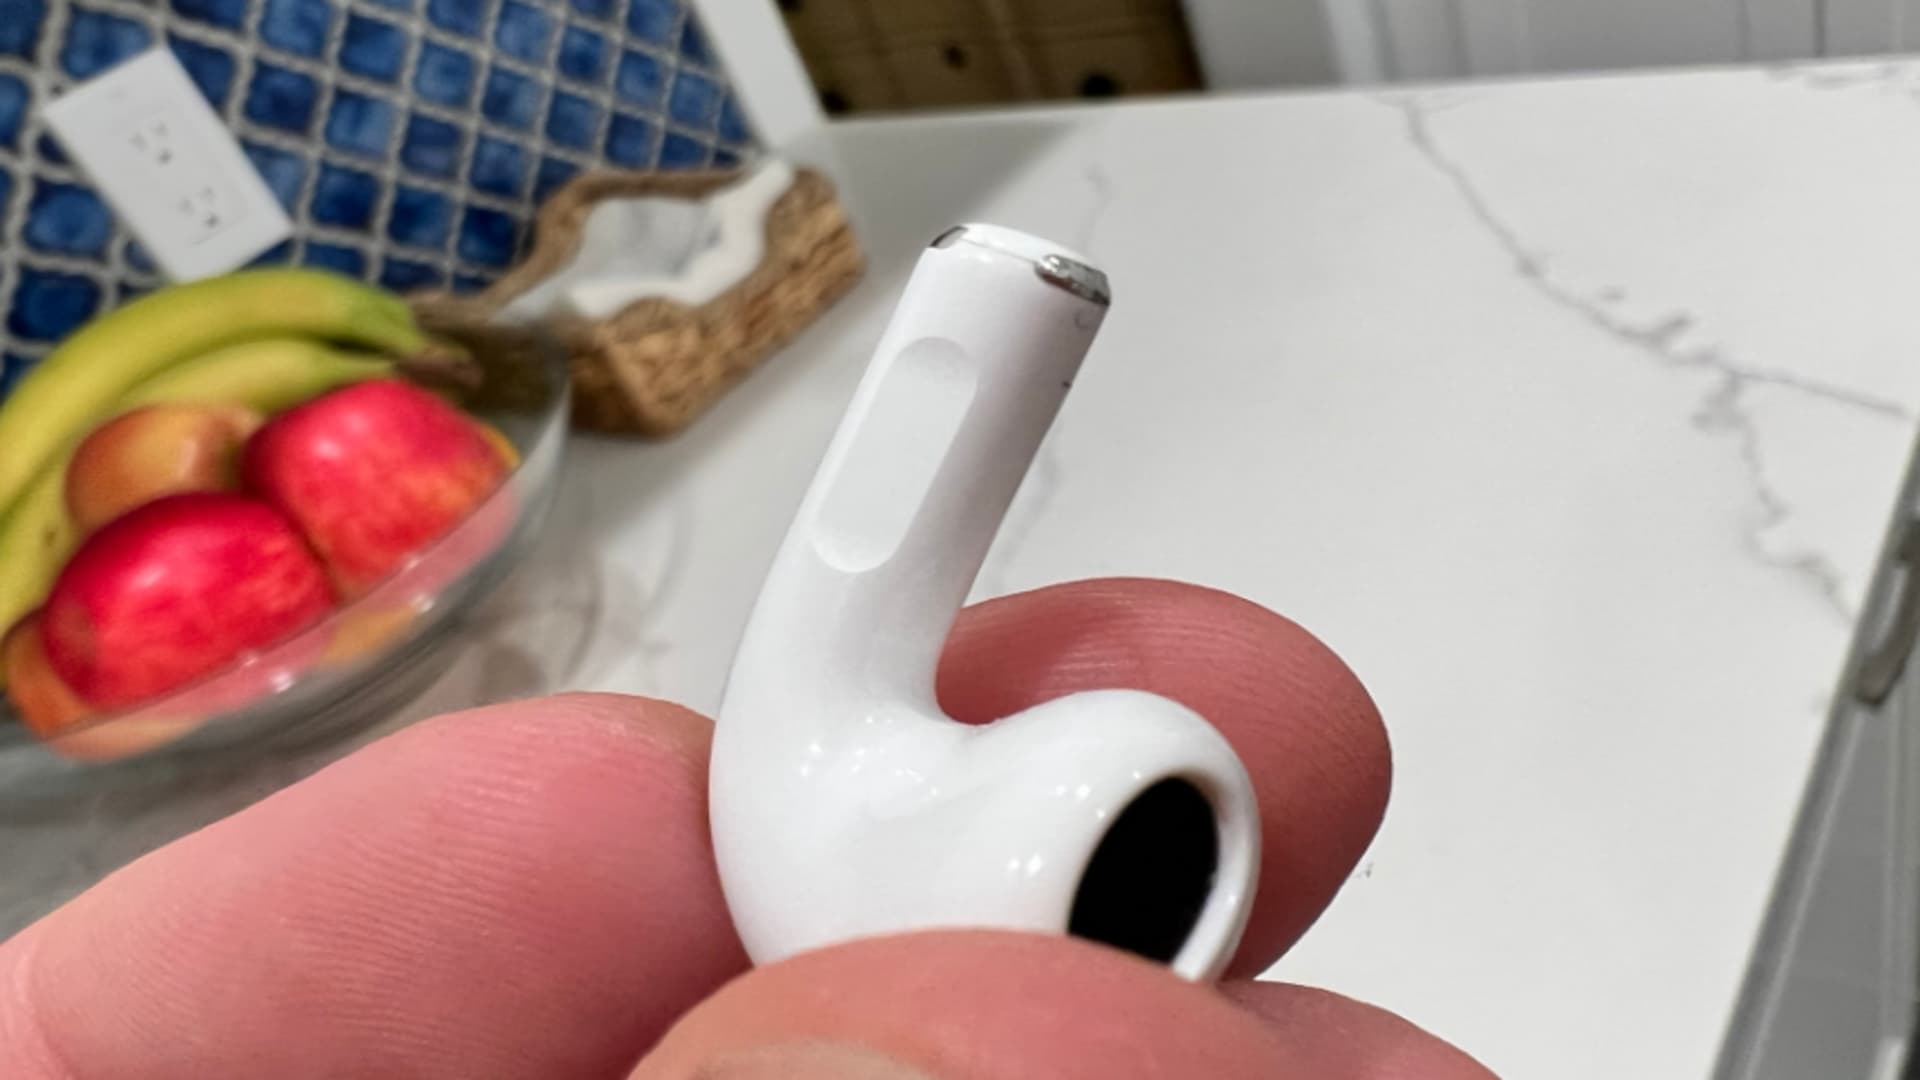 Apple AirPods with Spatial Audio